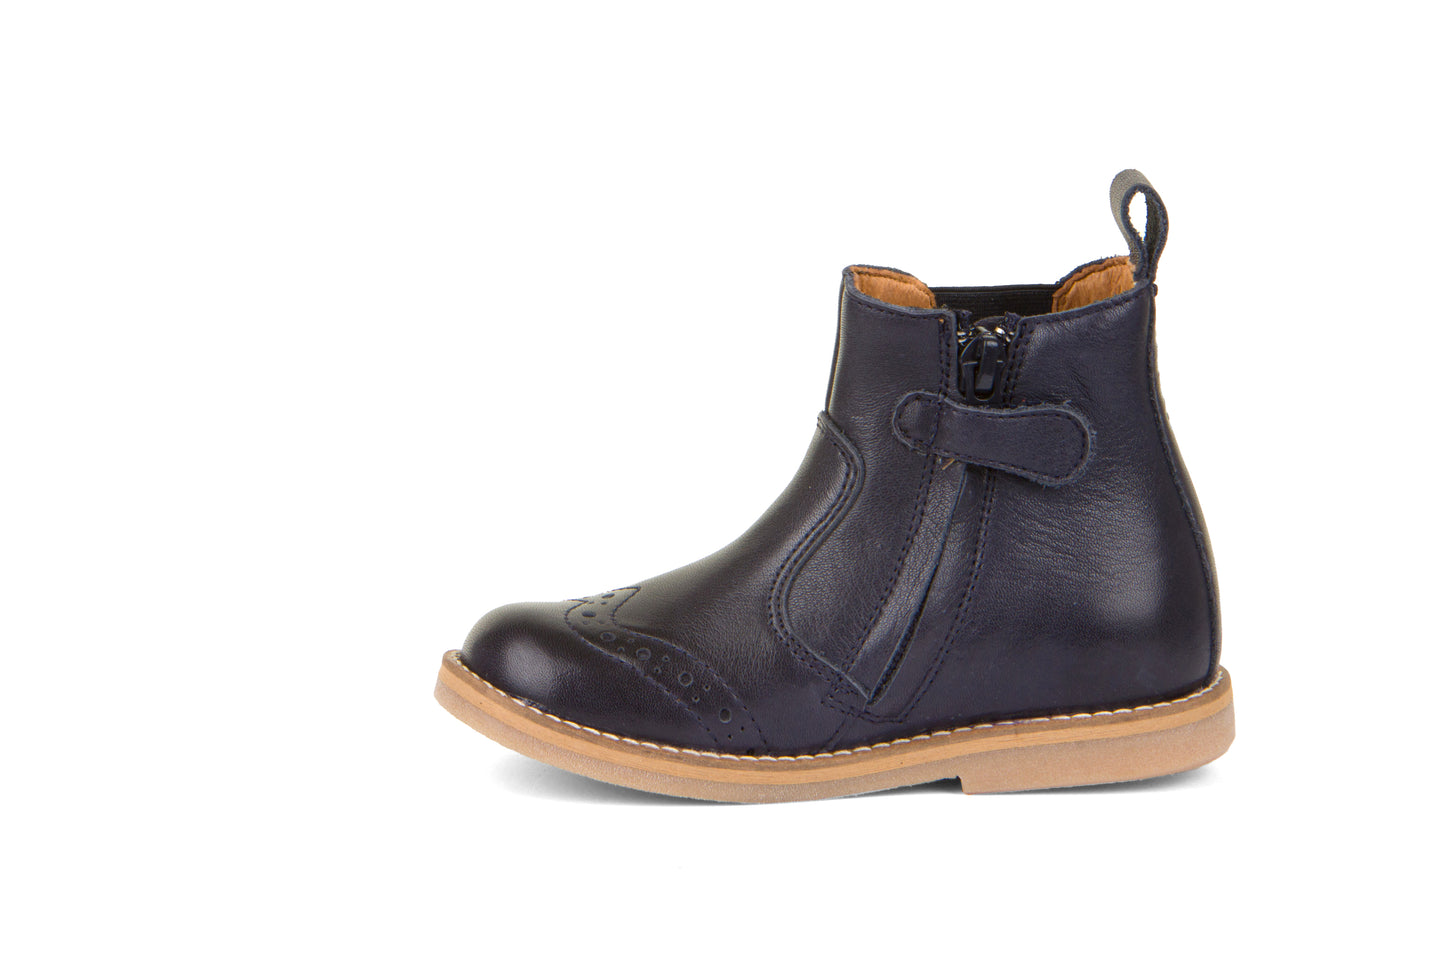 Chelys Brogue Leather Chelsea Boot in Dark Blue